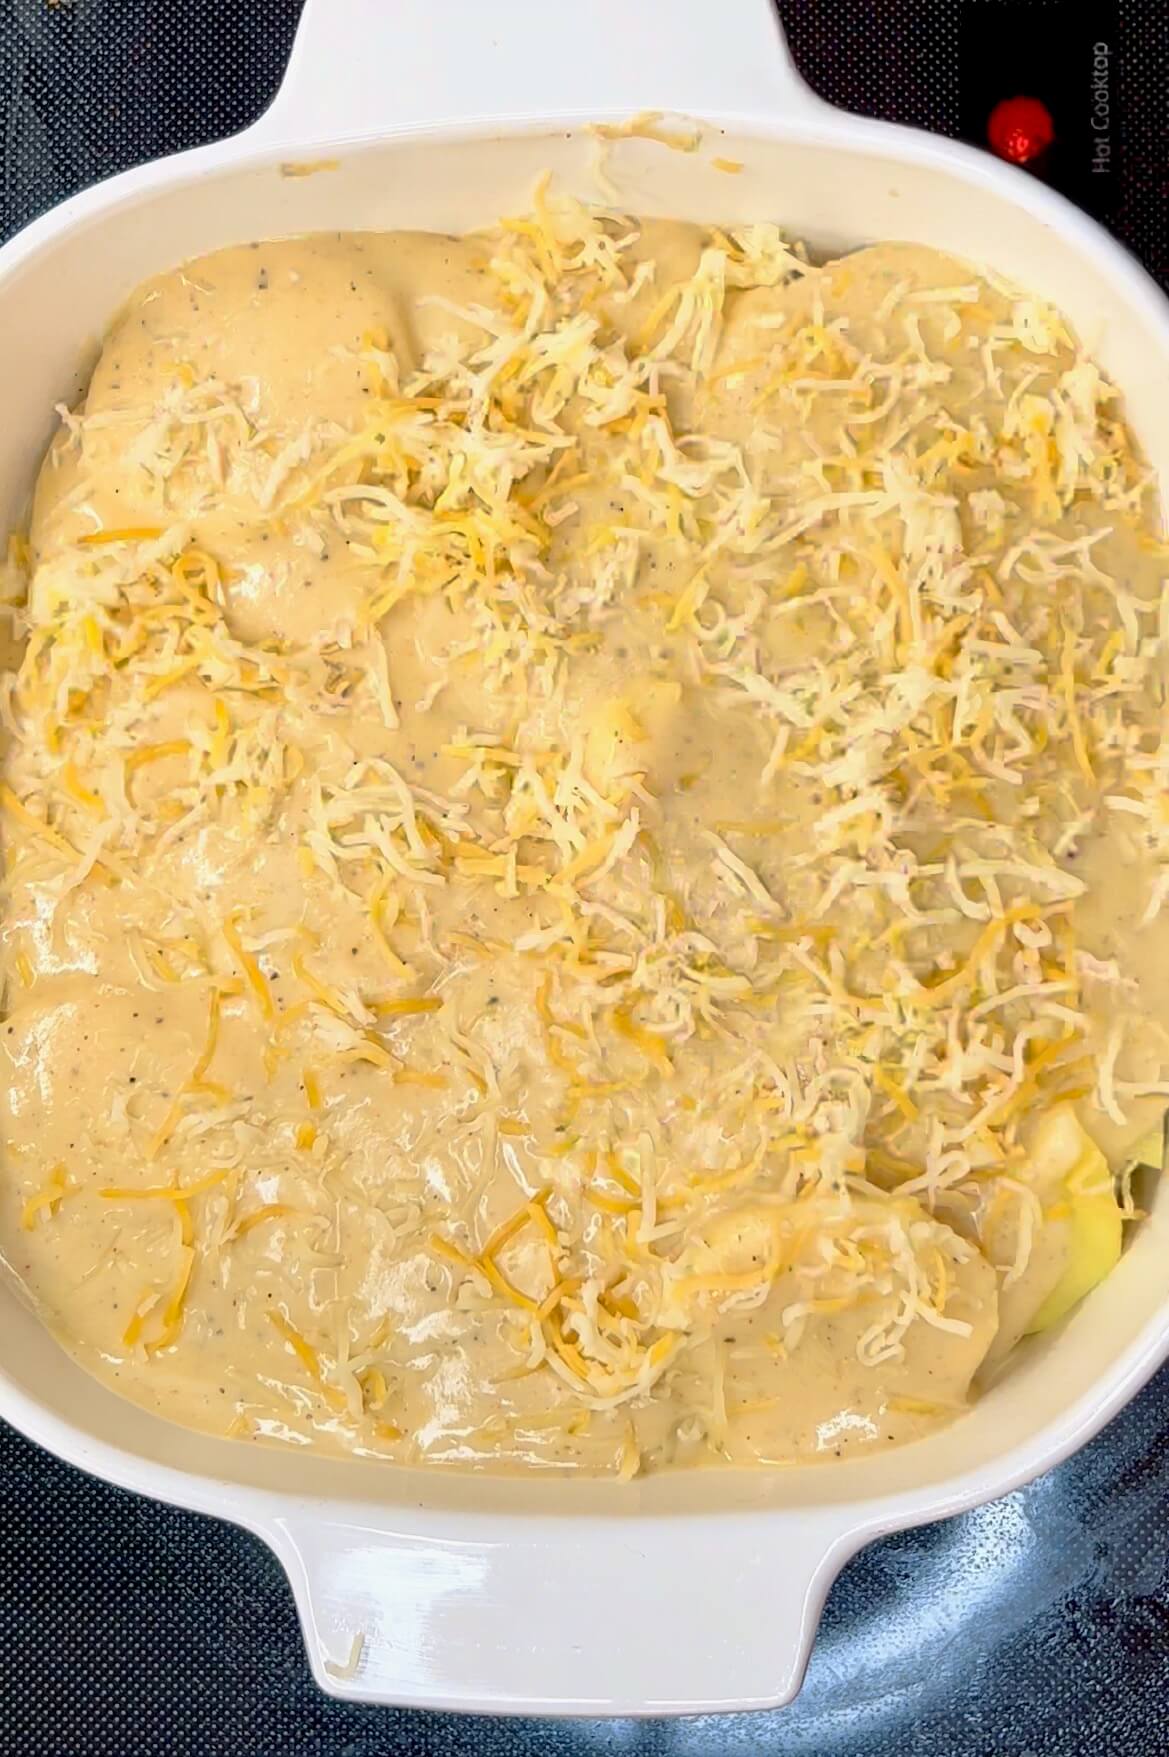 Cover the last layer of sliced potatoes with cheese sauce, then top with cheese.